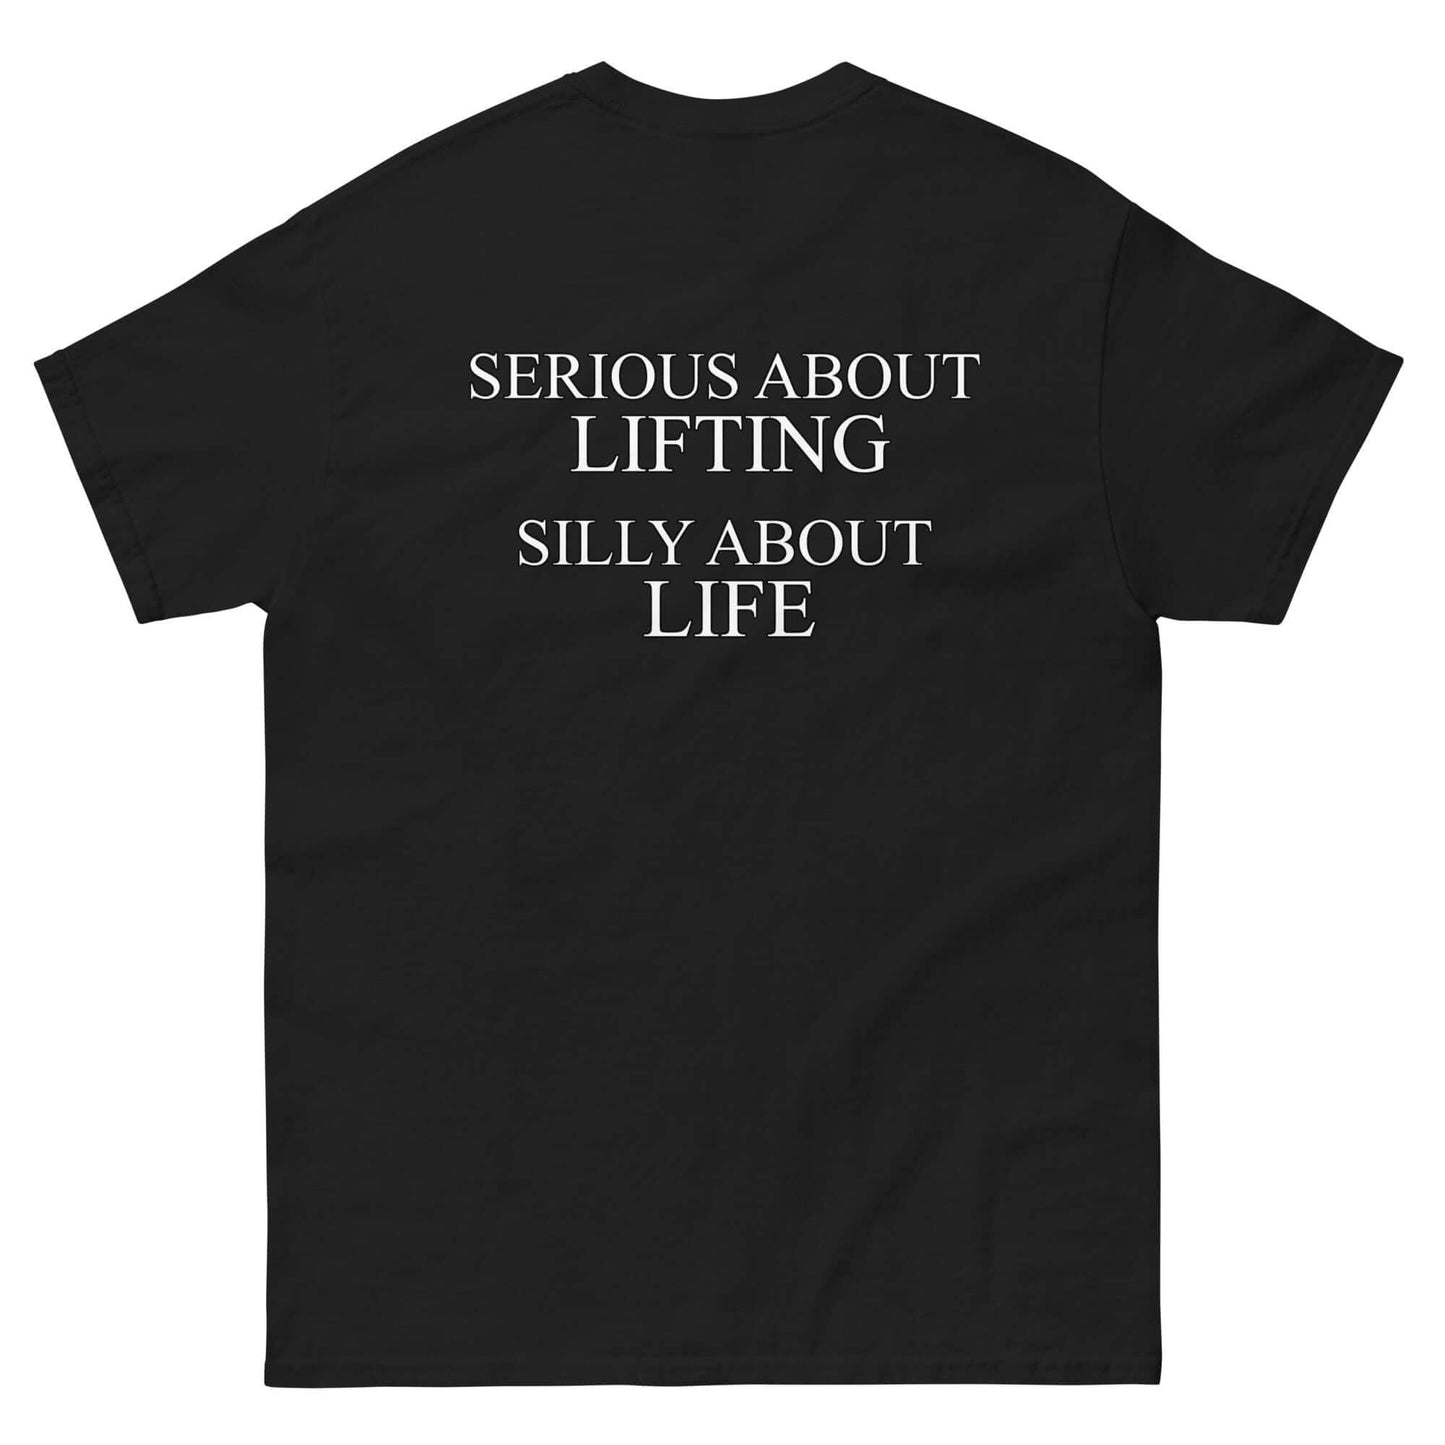 „Serious about Lifting“ – klassisches T-Shirt